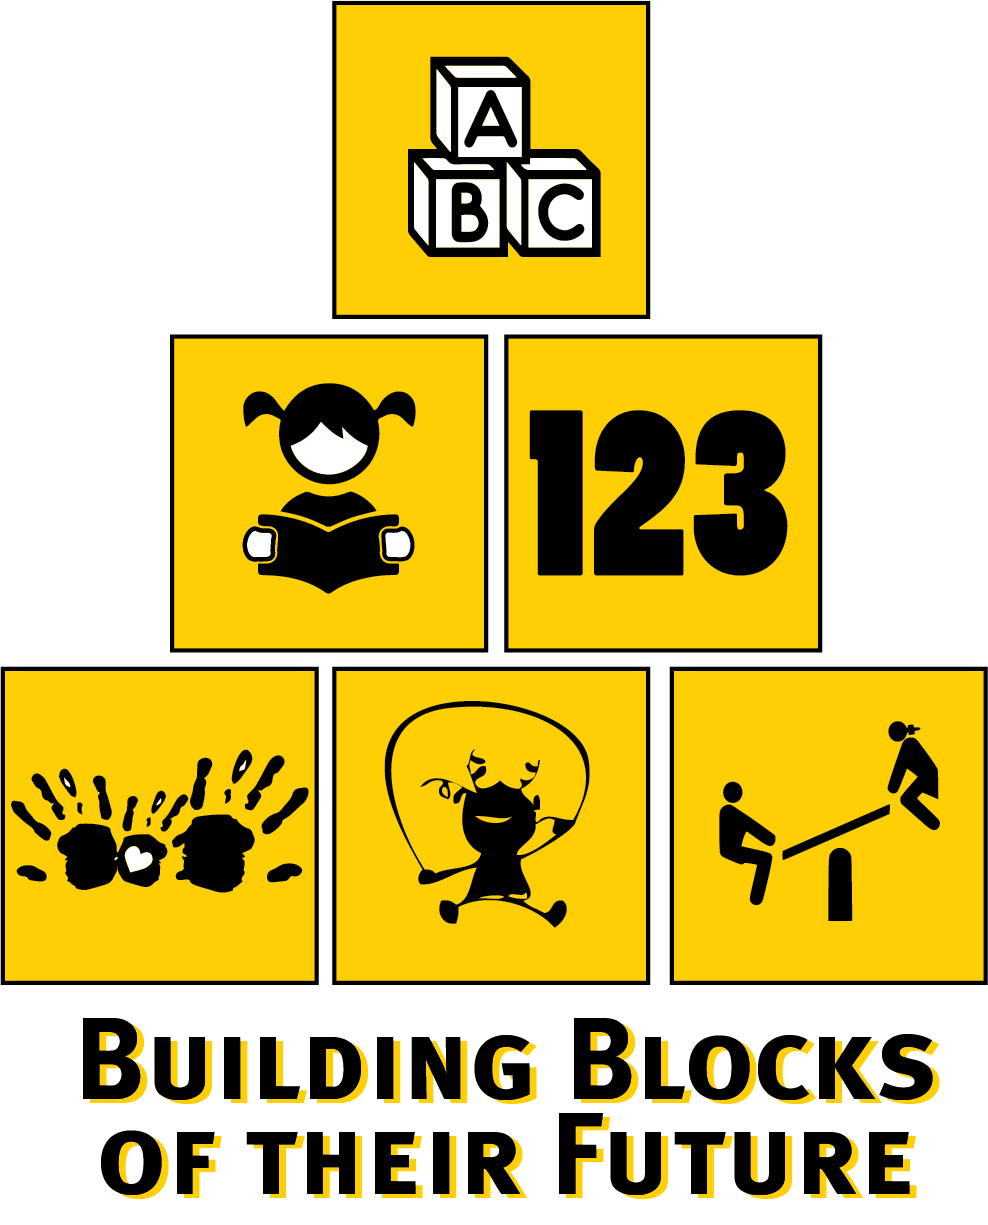 Early Childhood image representing building blocks